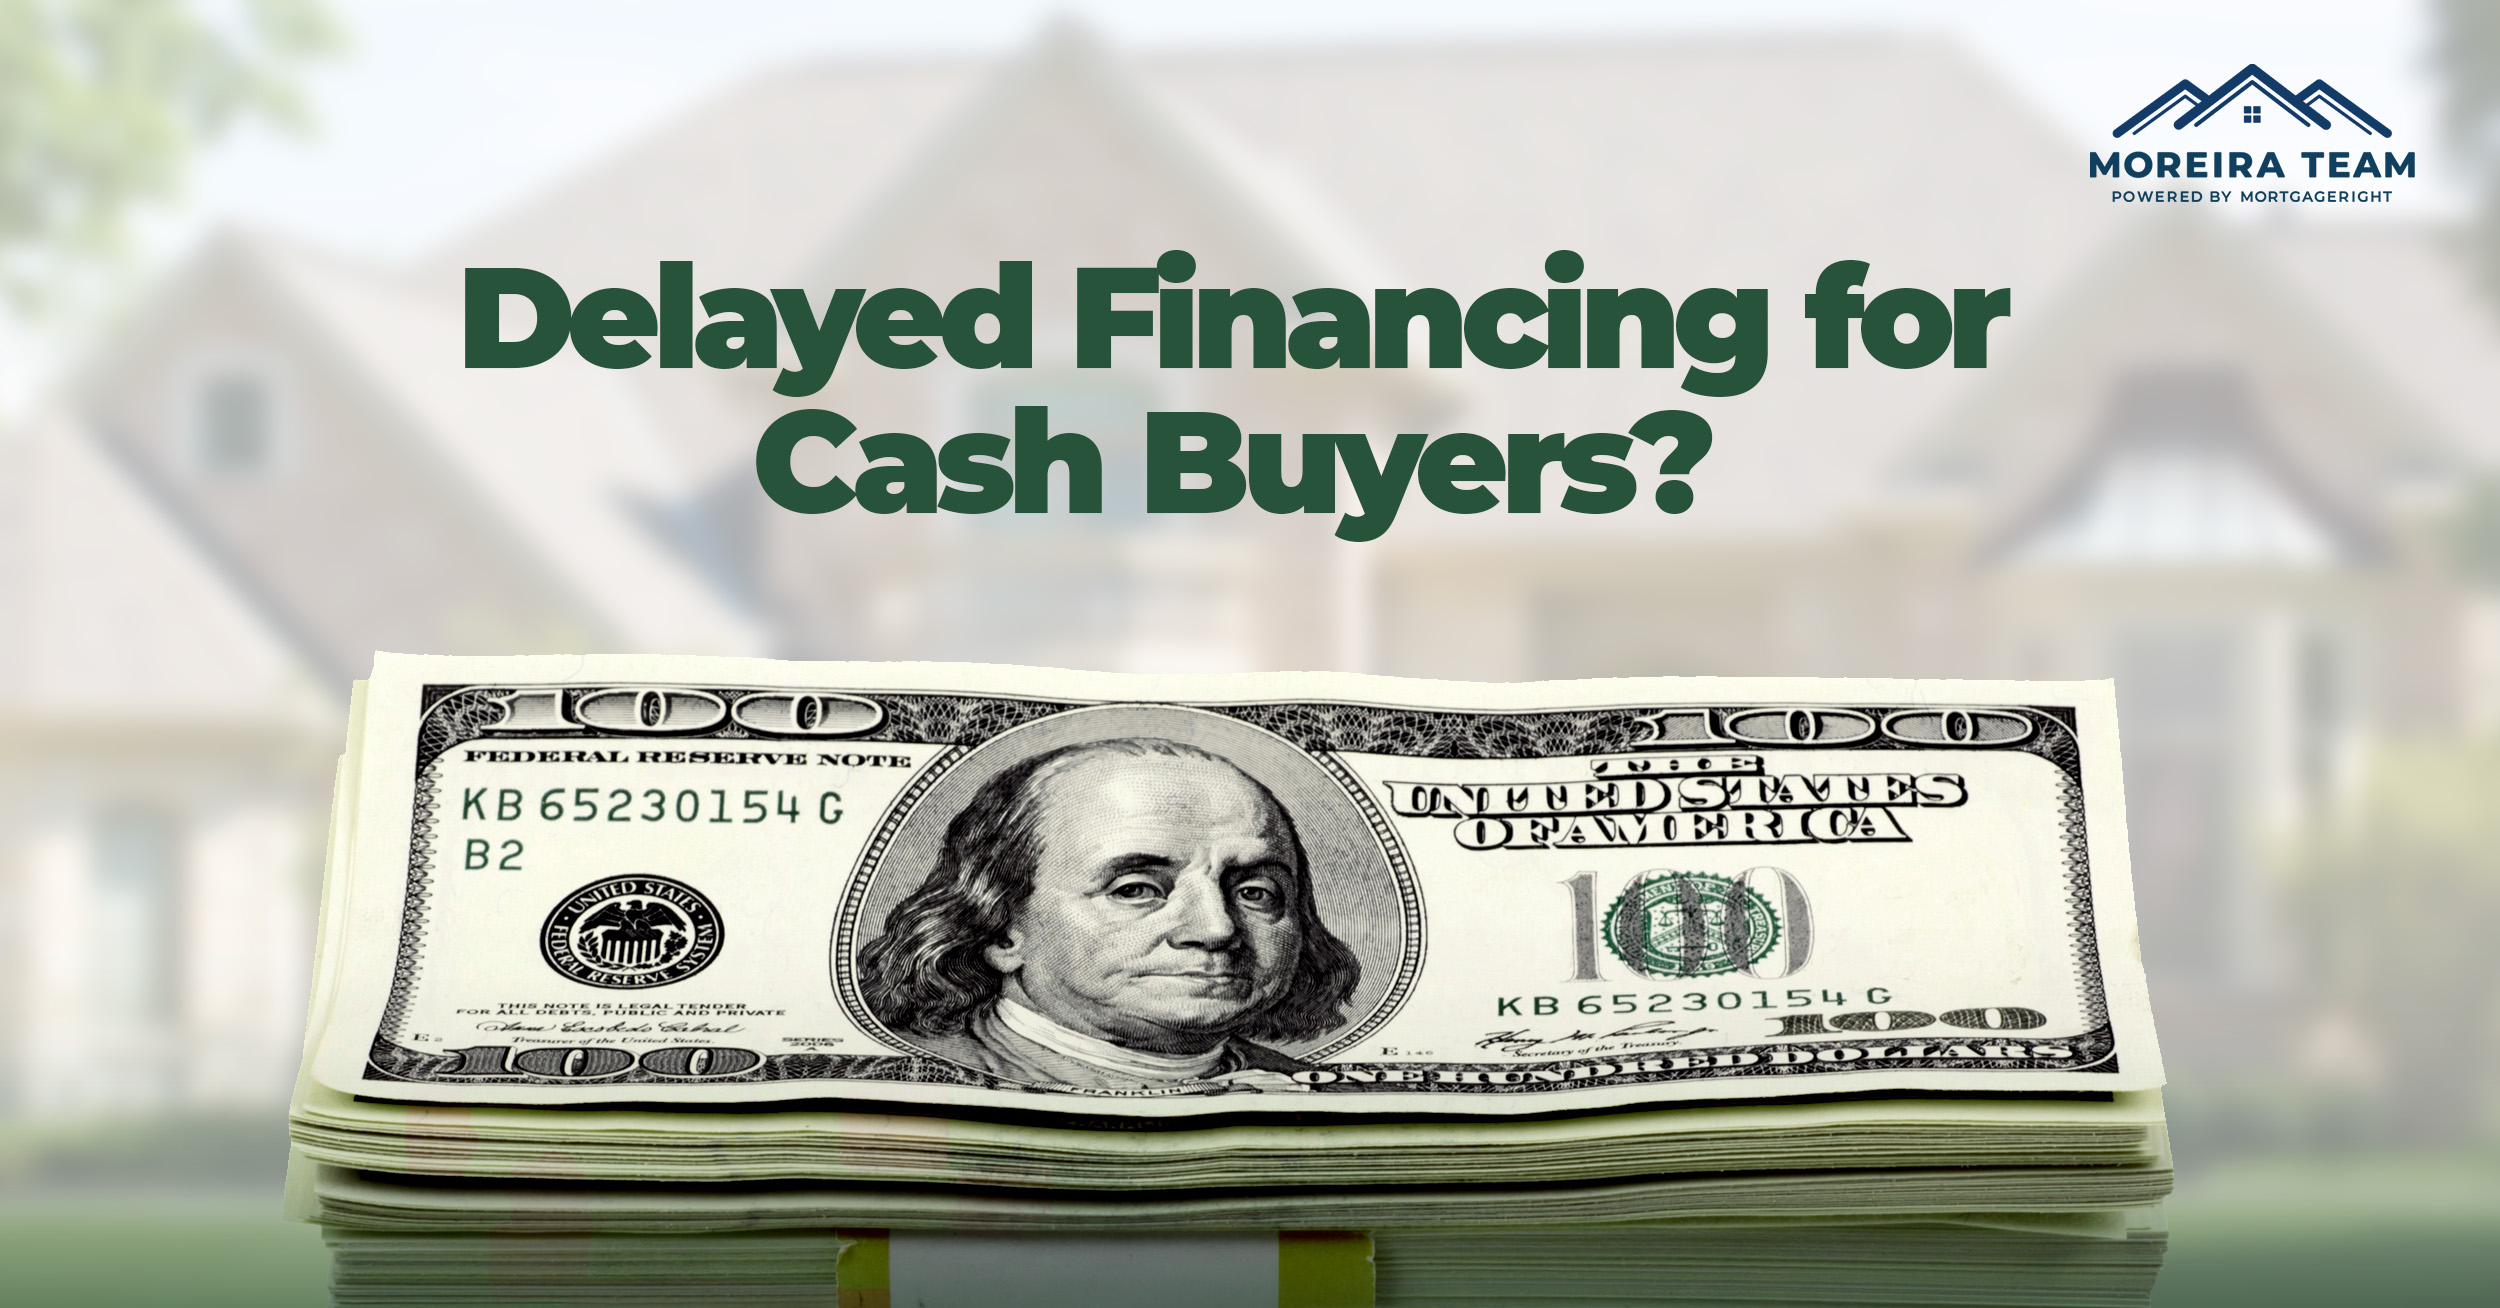 Delayed financing for cash buyers